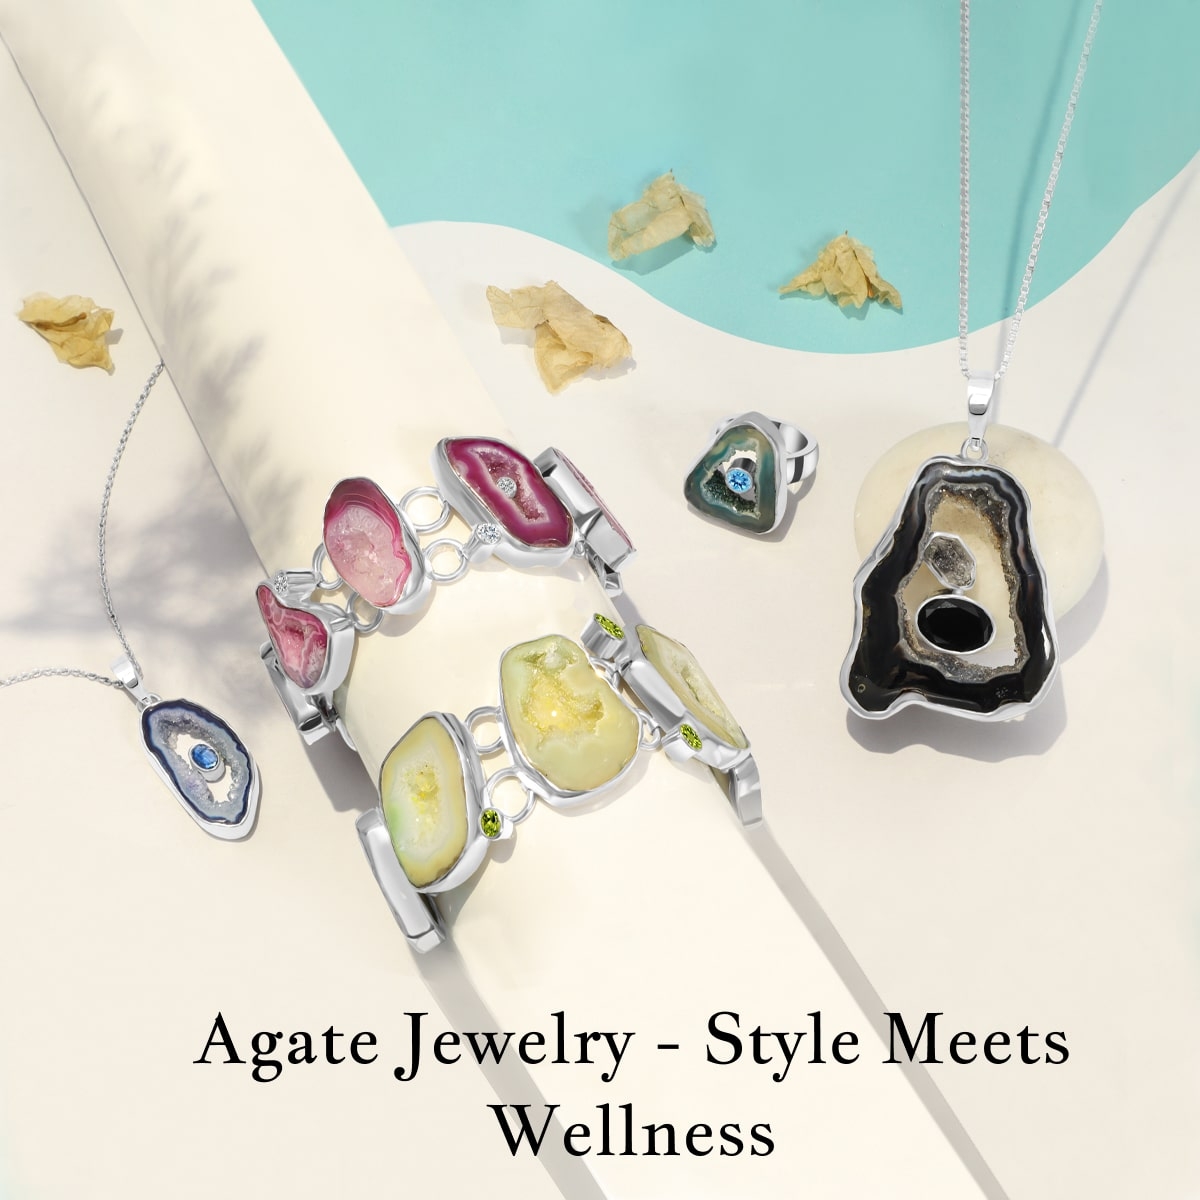 Benefits Of Wearing Agate Jewelry